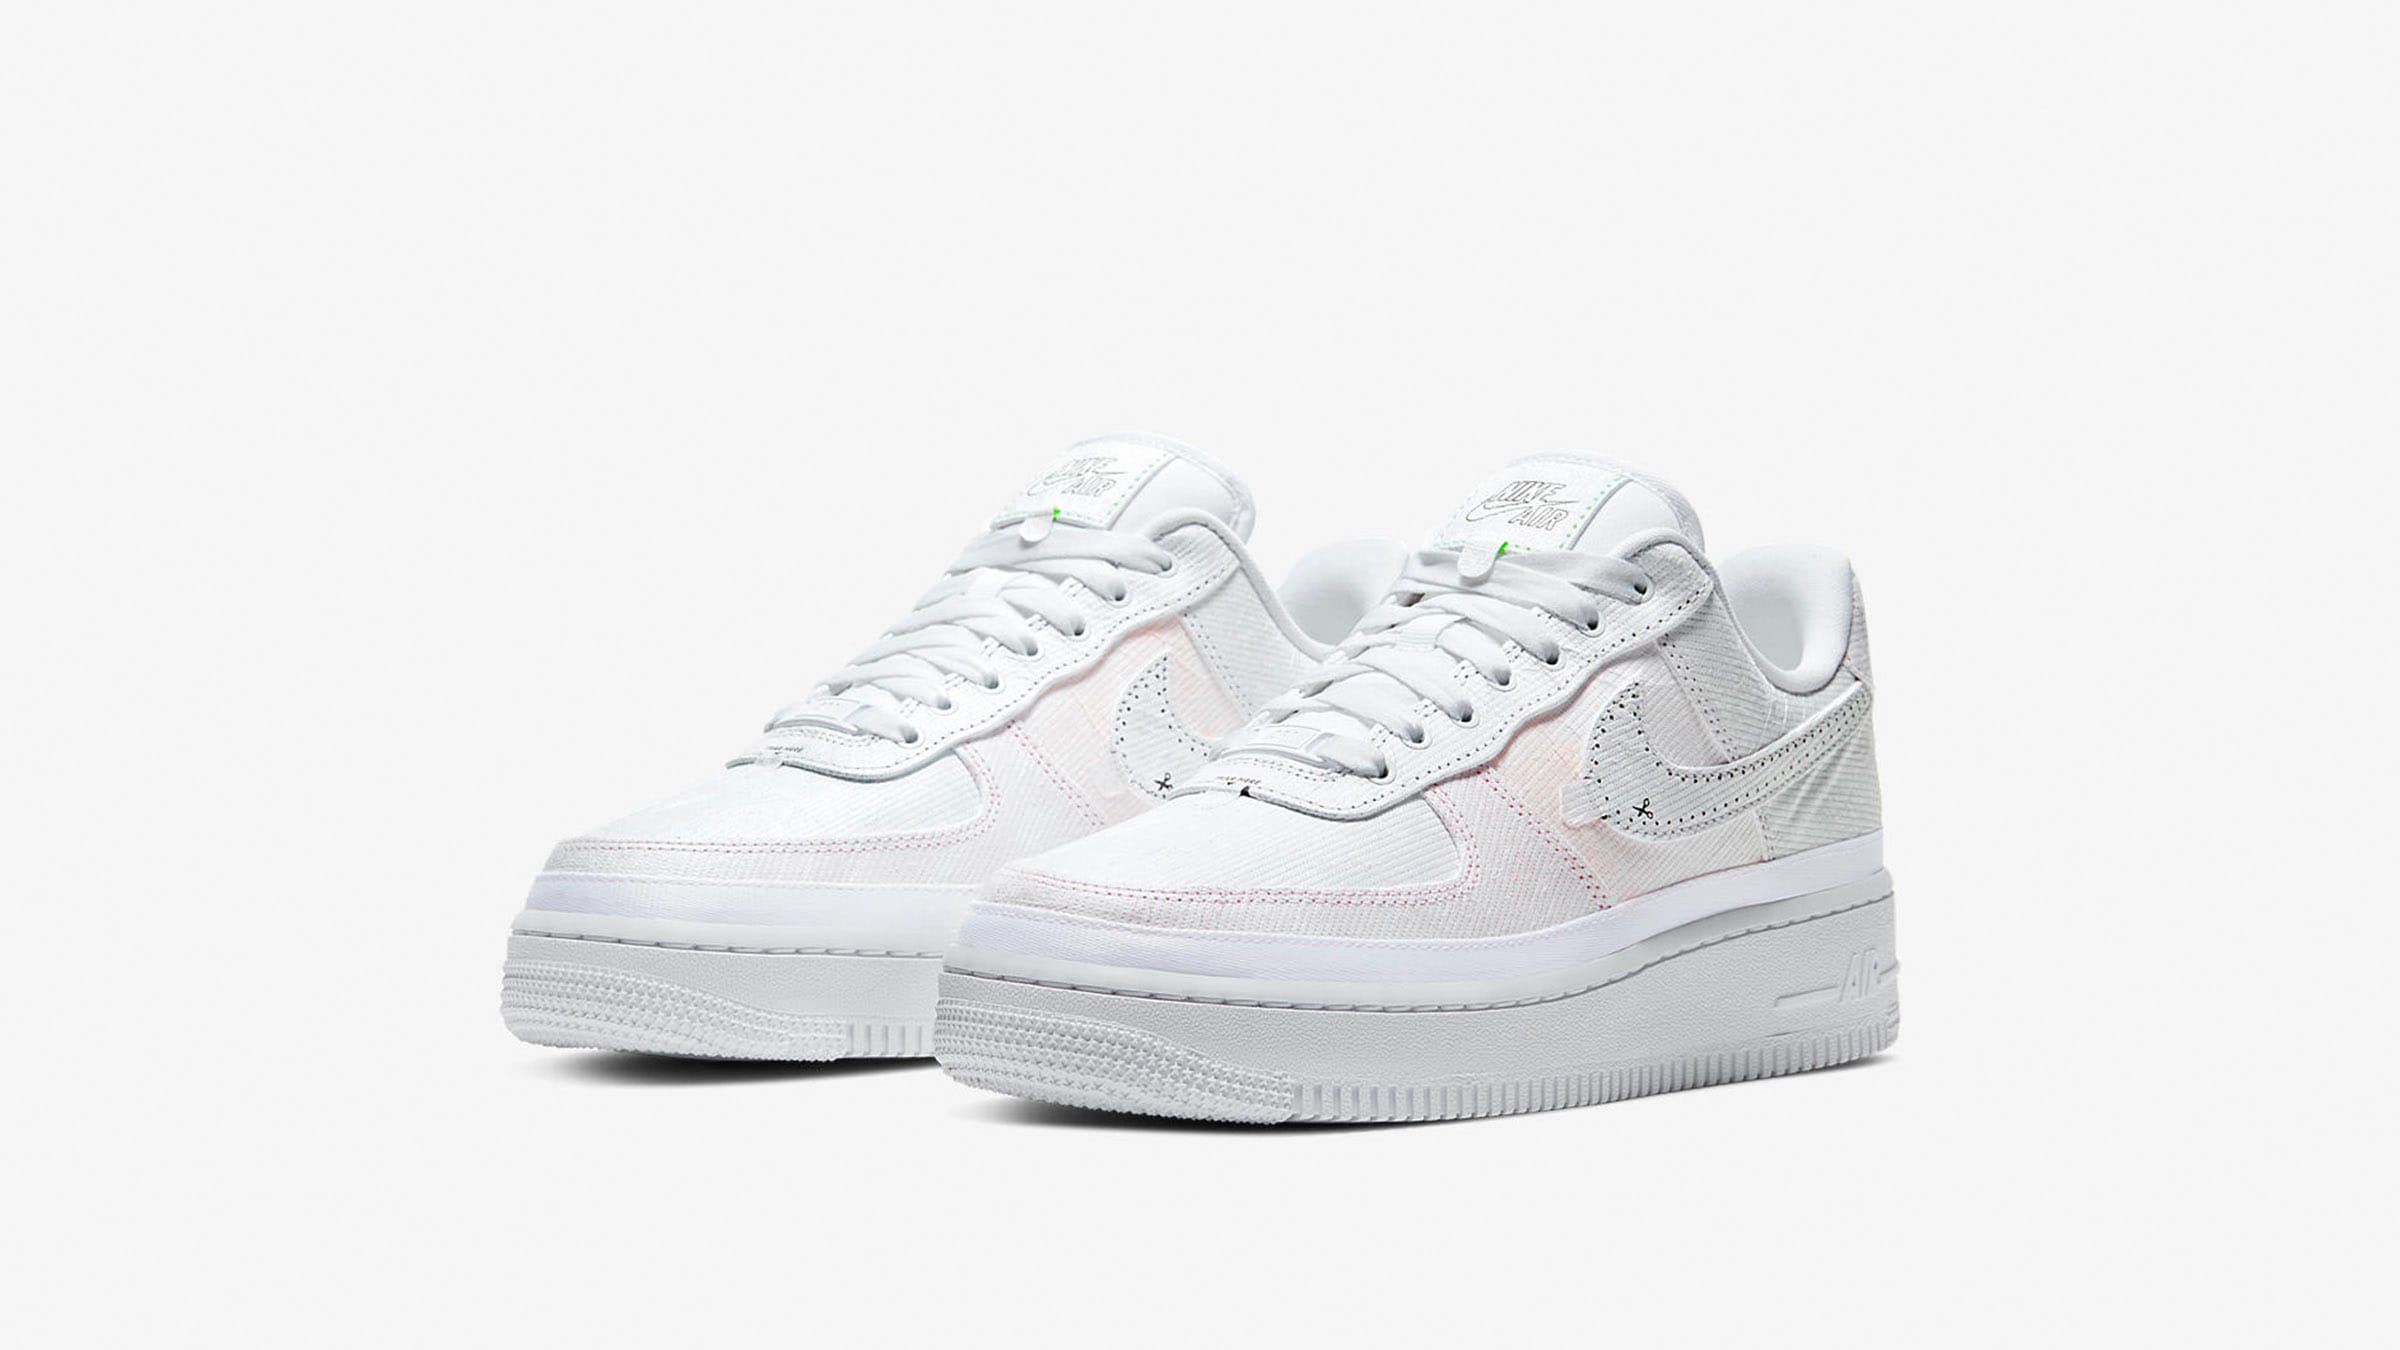 Nike Wmns Air Force 1 07 LX, White / White-Multi-Color 